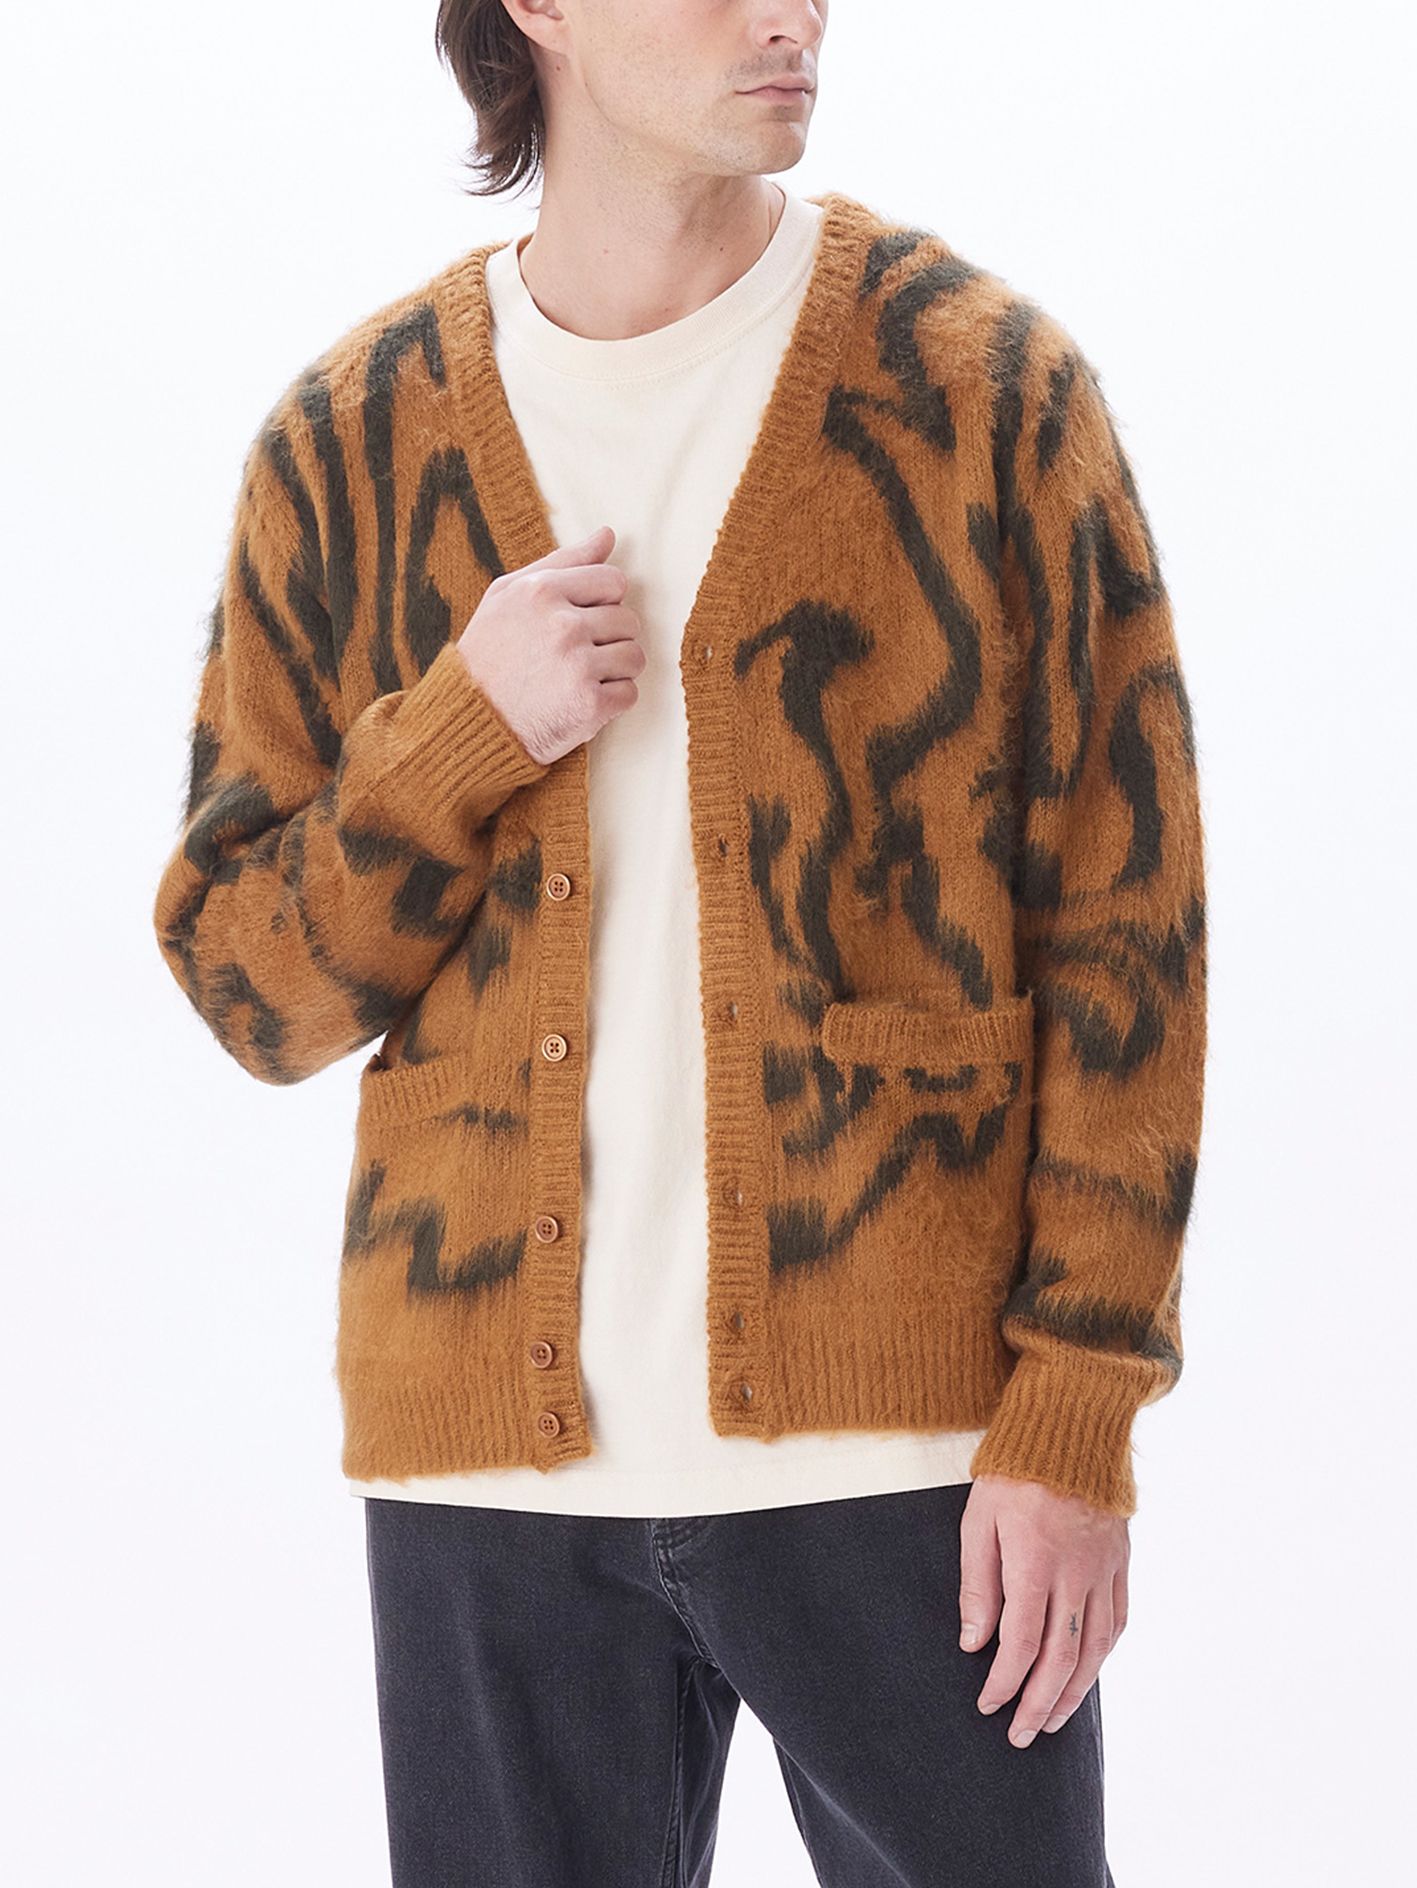 OBEY - 総柄 カーディガン - PALLY CARDIGAN - CATECHU WOOD | FROG's TAIL